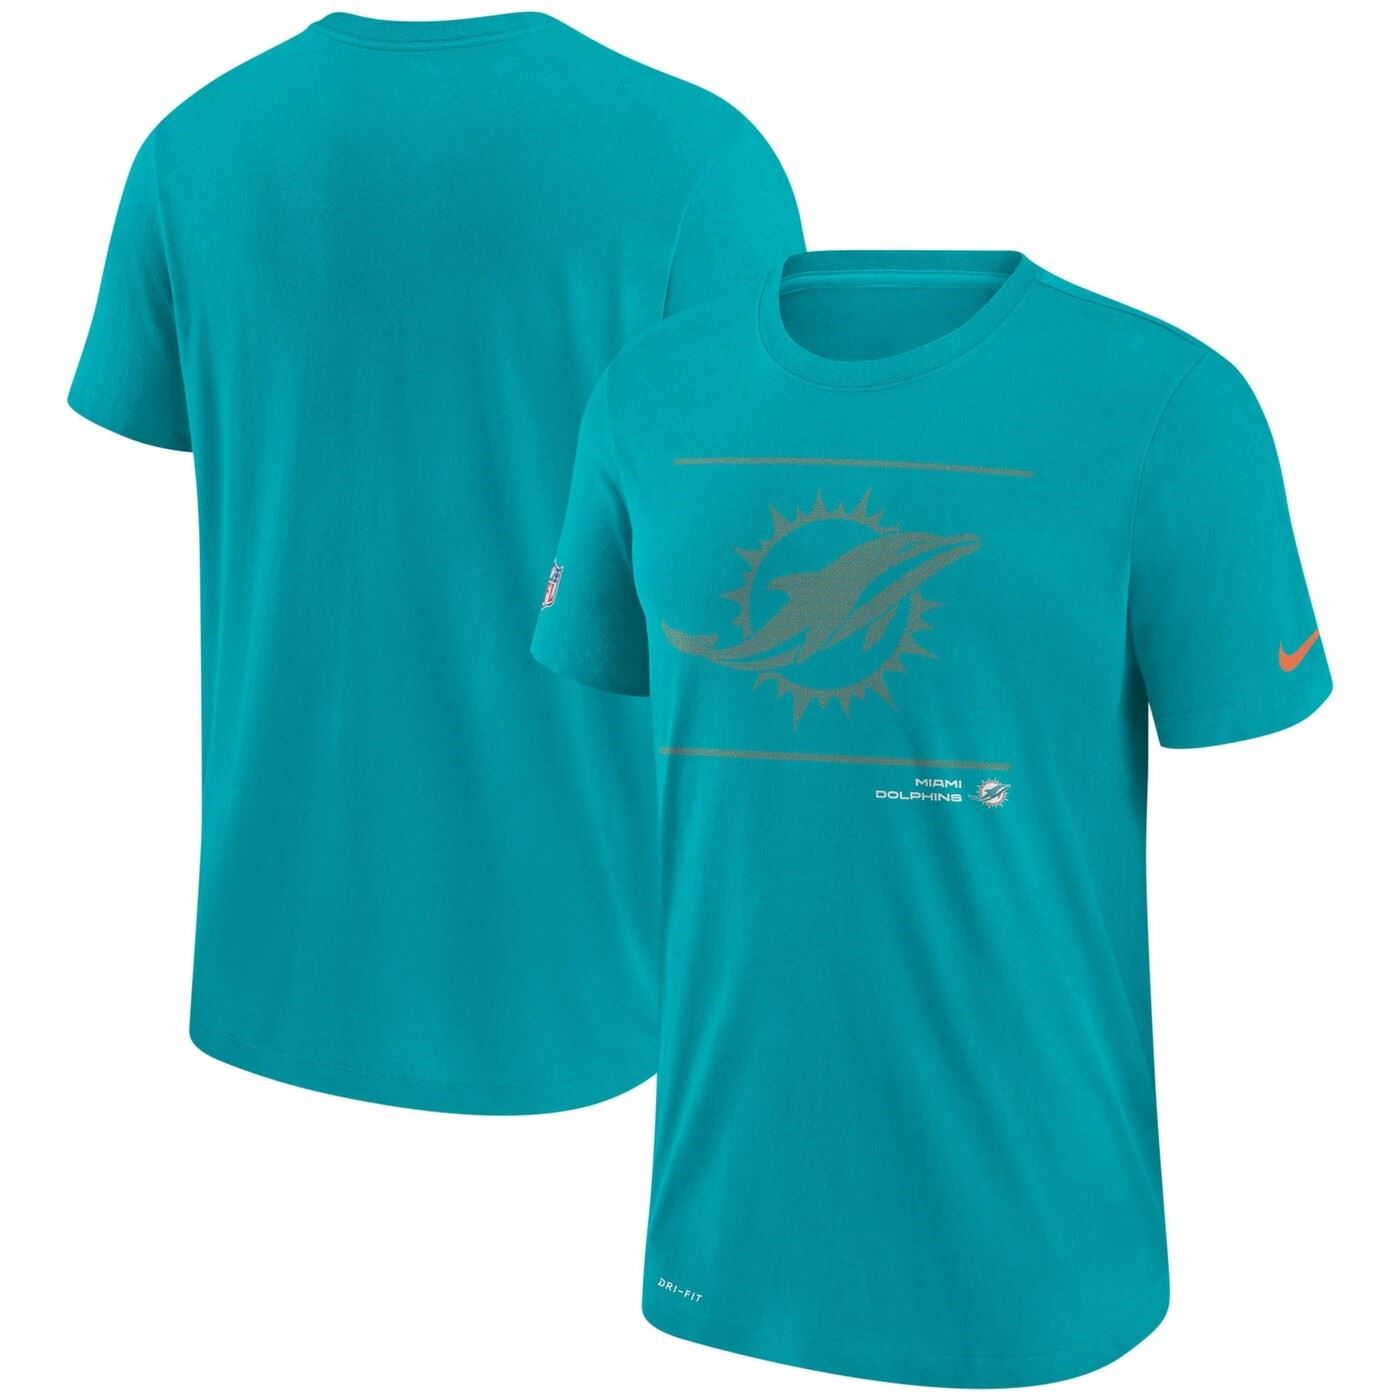 Miami Dolphins NFL DFCT Team Issue Tee Turbo Green T-Shirt Nike